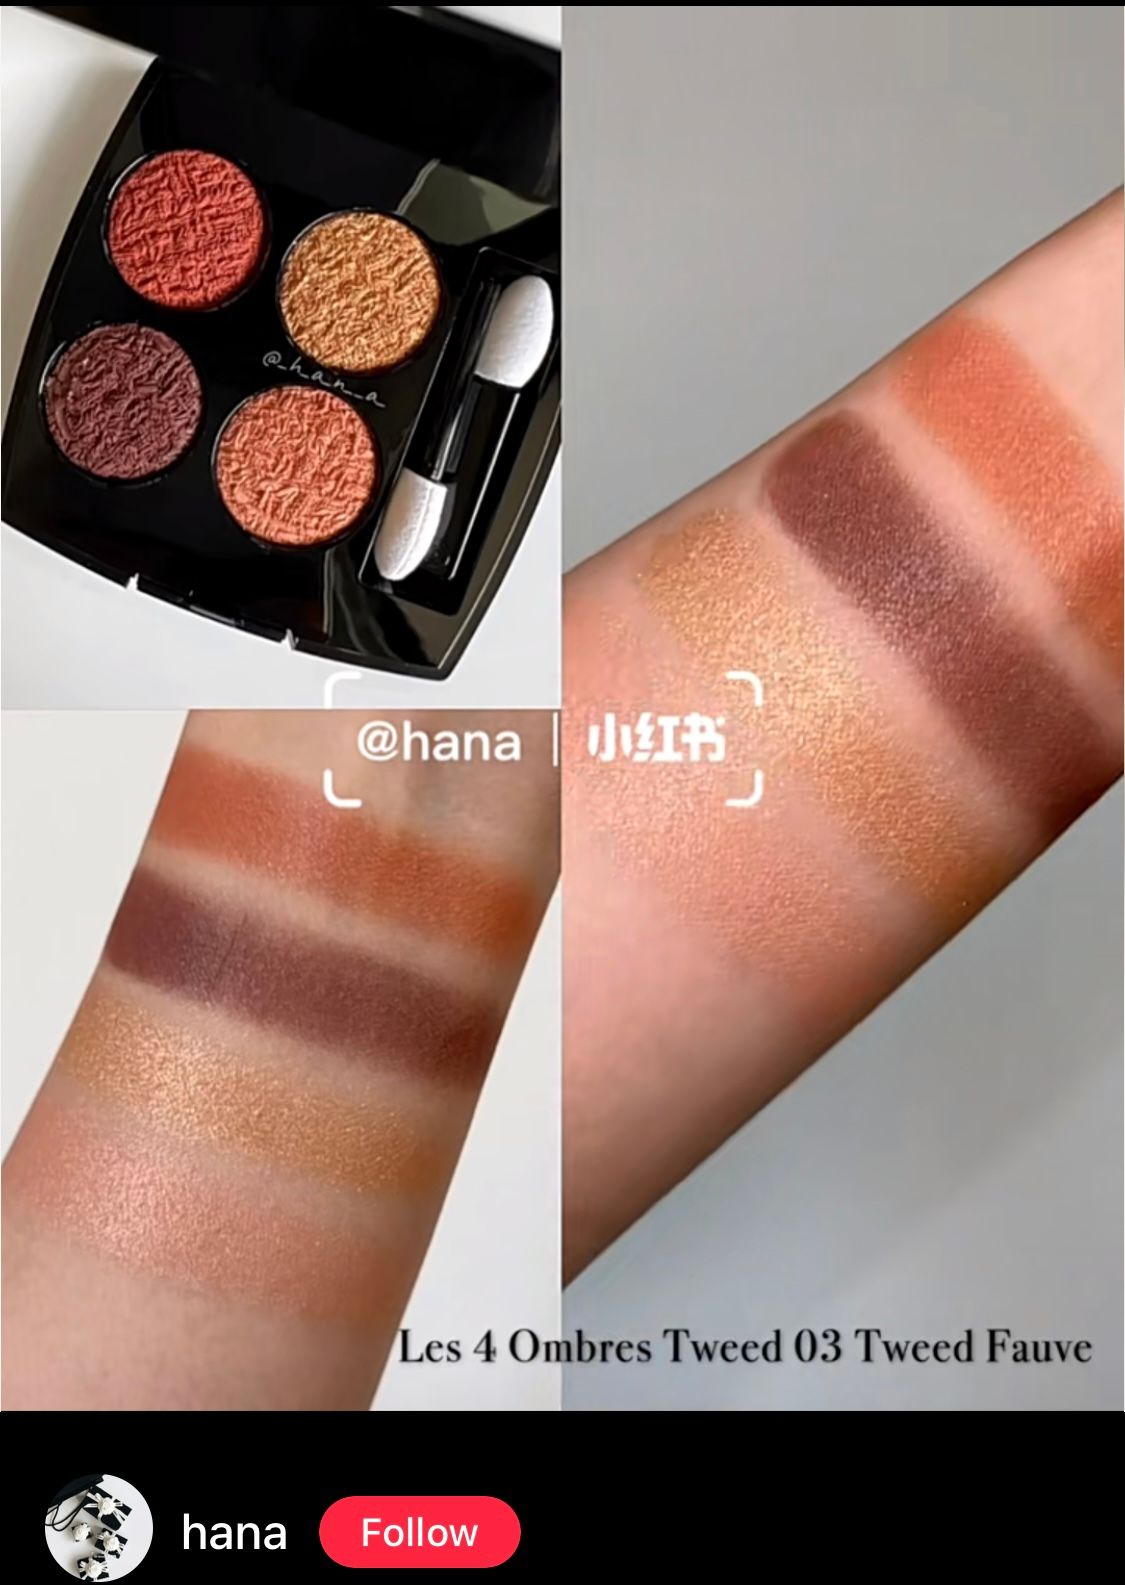 CHANEL TWEED makeup collection, All 4 Tweed palettes in natural light